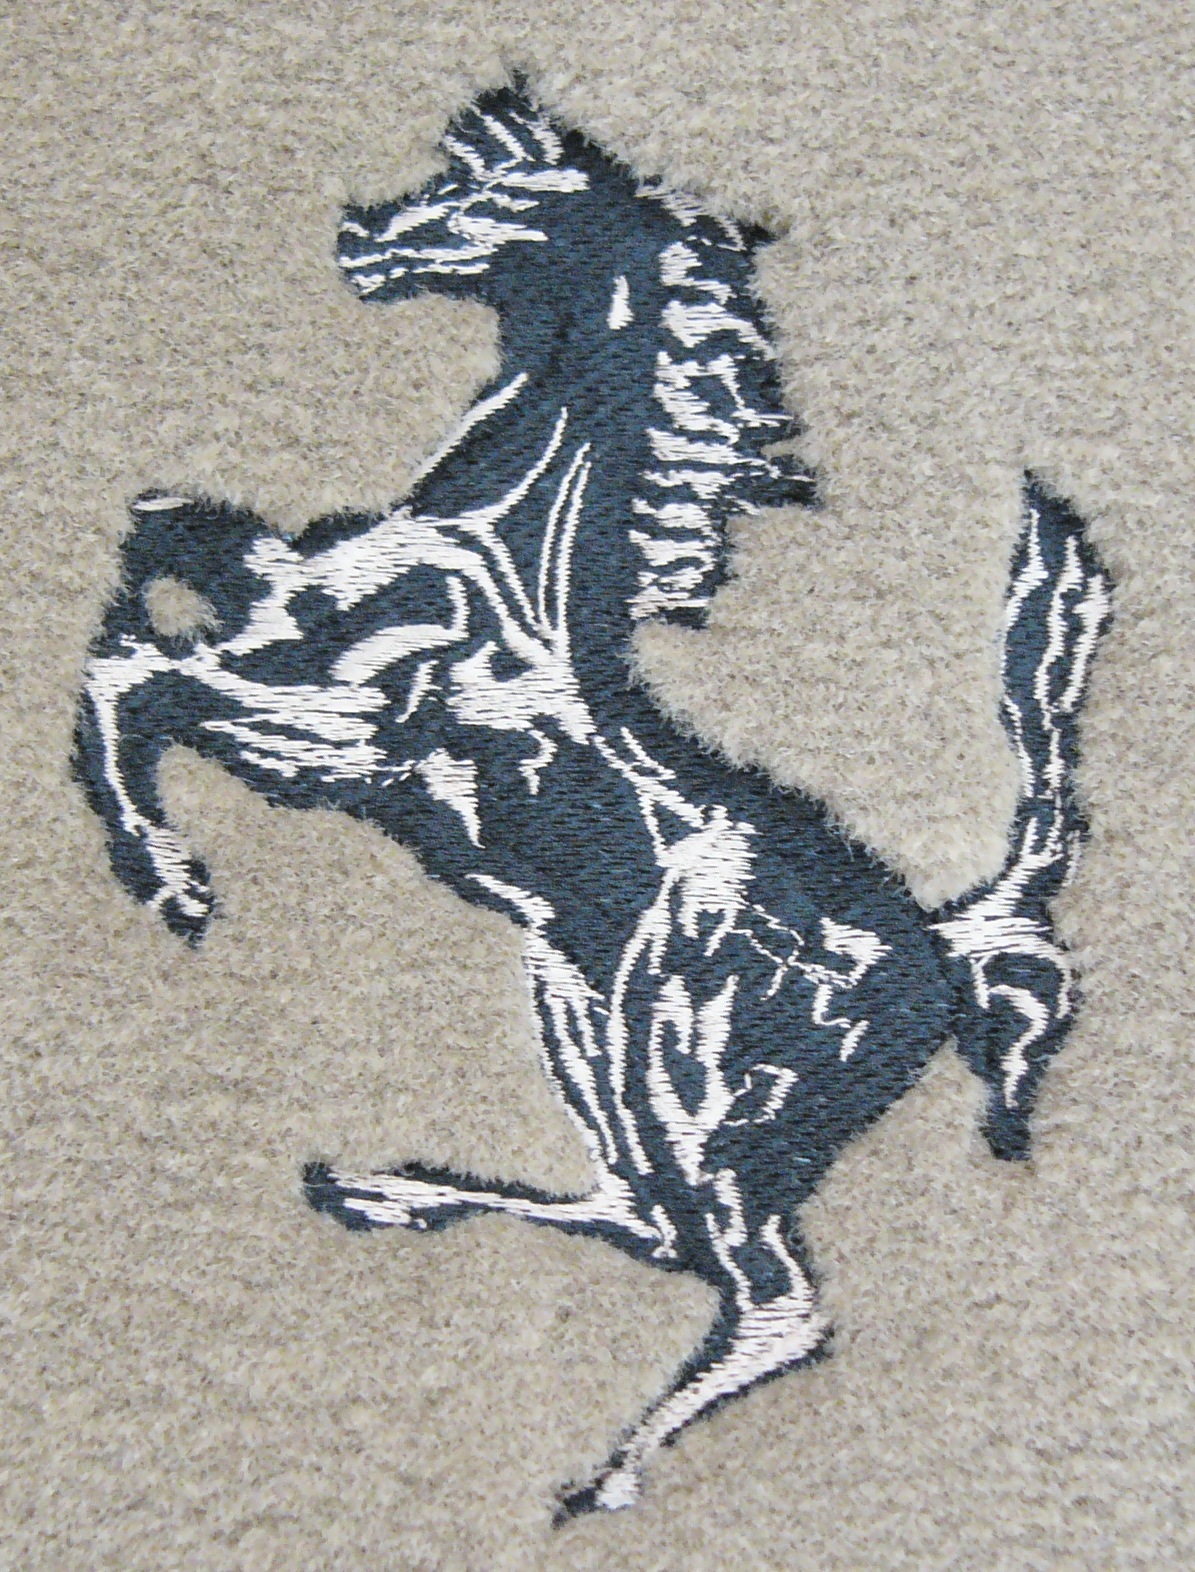 Tan/Black horse embroidery detail